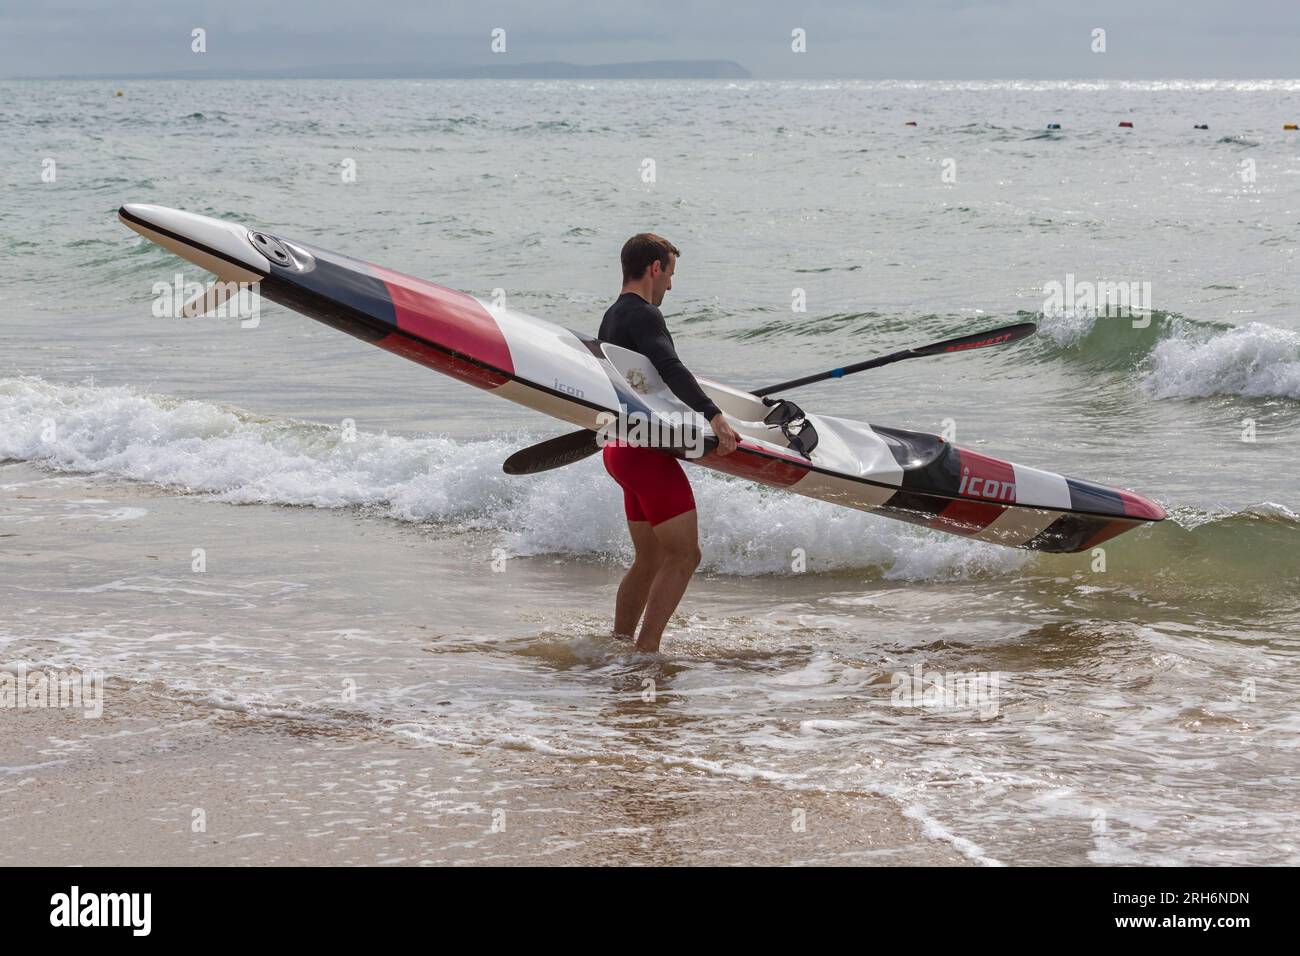 Man getting surfski surf ski ready in the sea to go surf skiing surfskiing at Branksome Chine beach, Poole, Dorset, UK in August Stock Photo